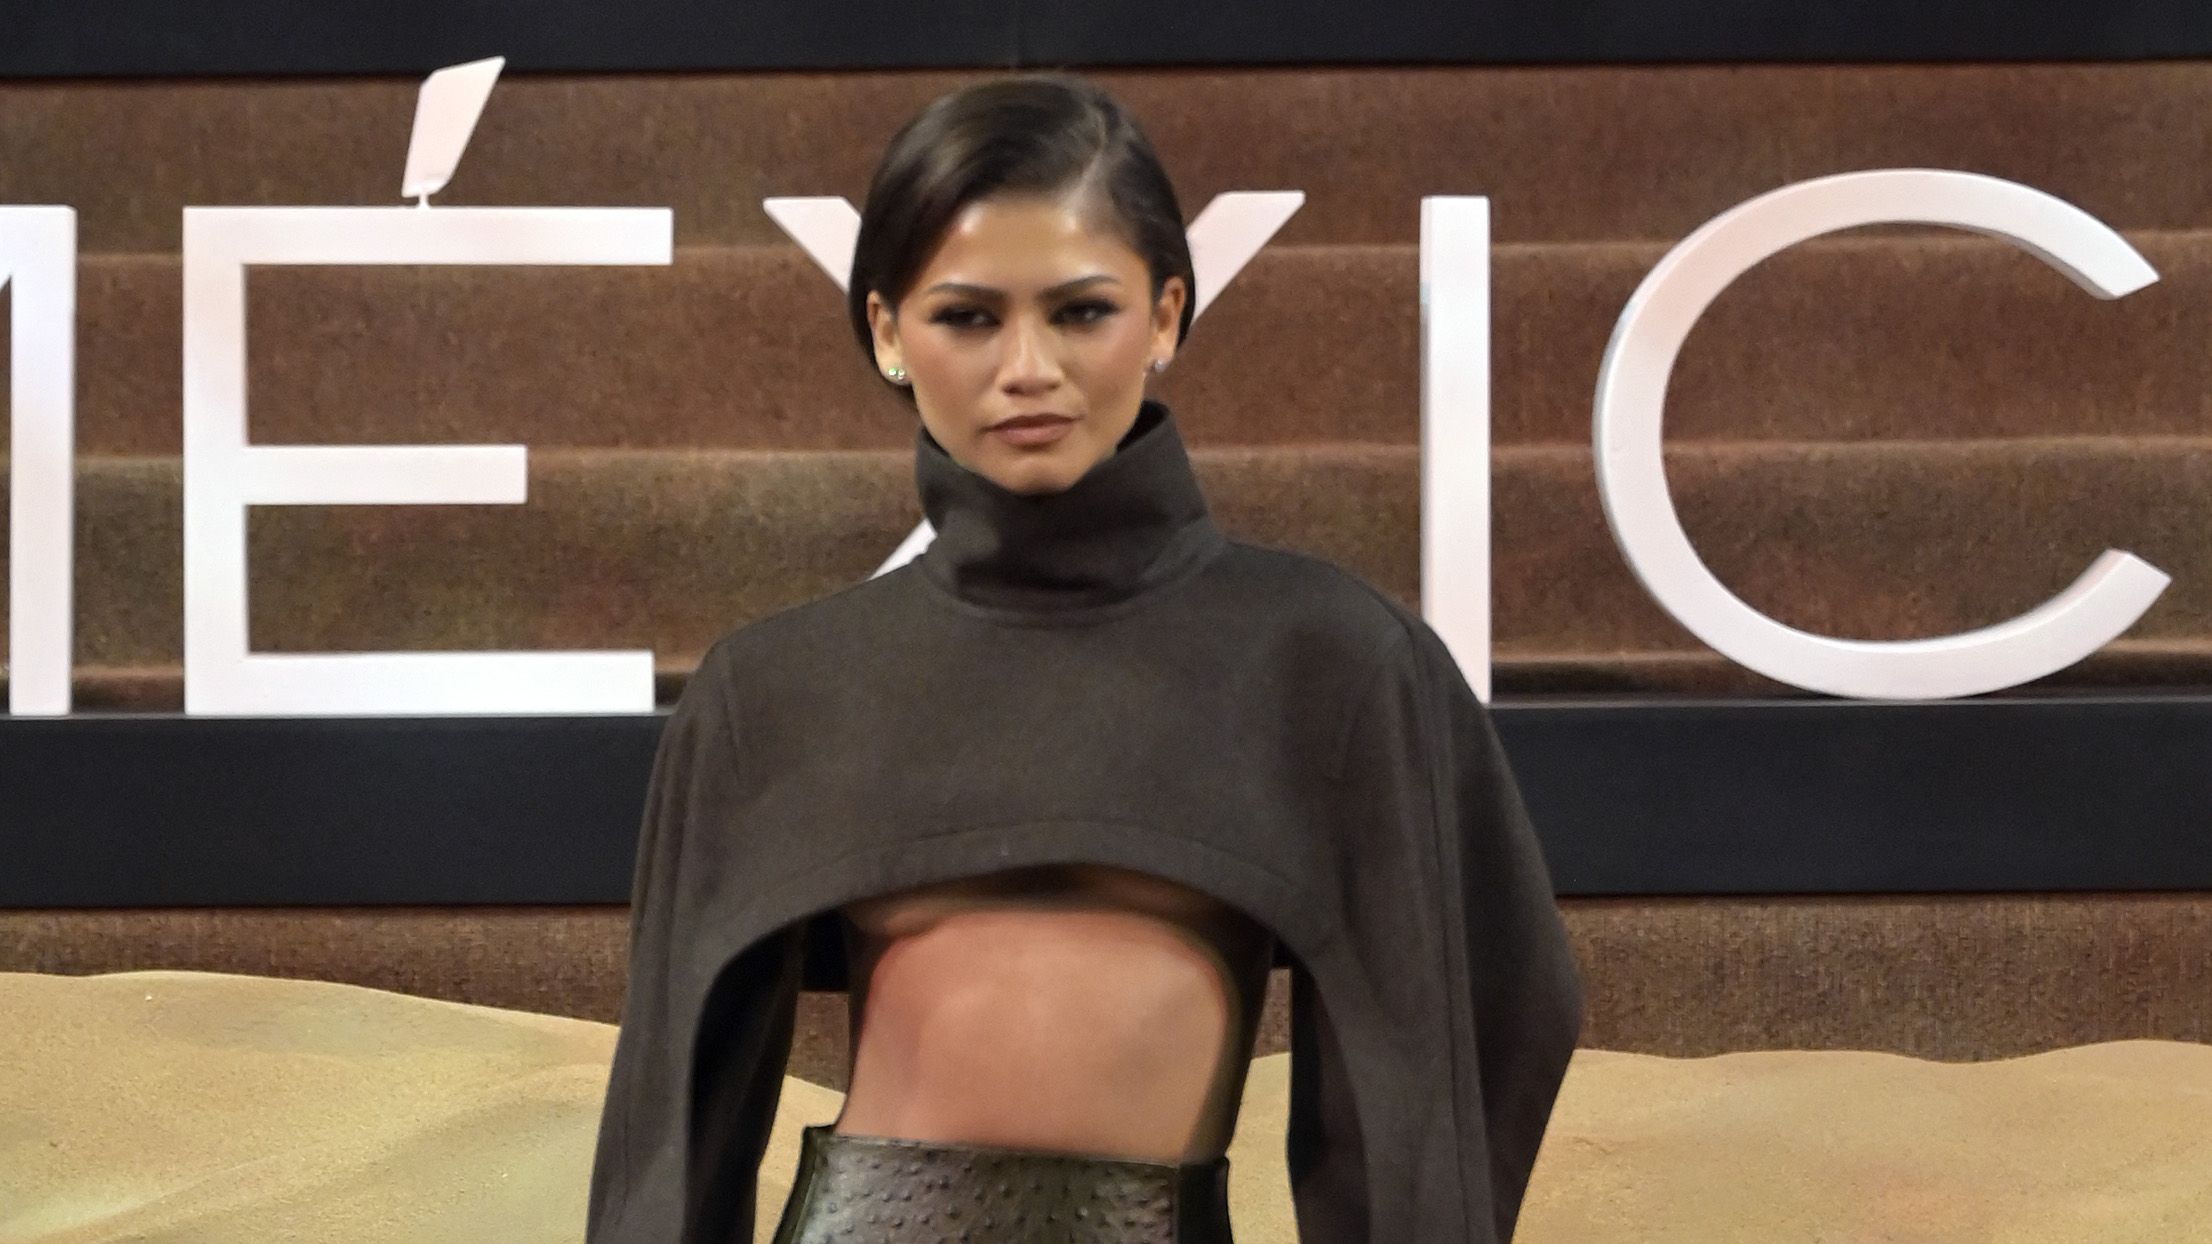 https://hips.hearstapps.com/hmg-prod/images/actress-and-singer-zendaya-maree-stoermer-poses-for-a-news-photo-1707310597.jpg?crop=1xw:0.38474xh;center,top